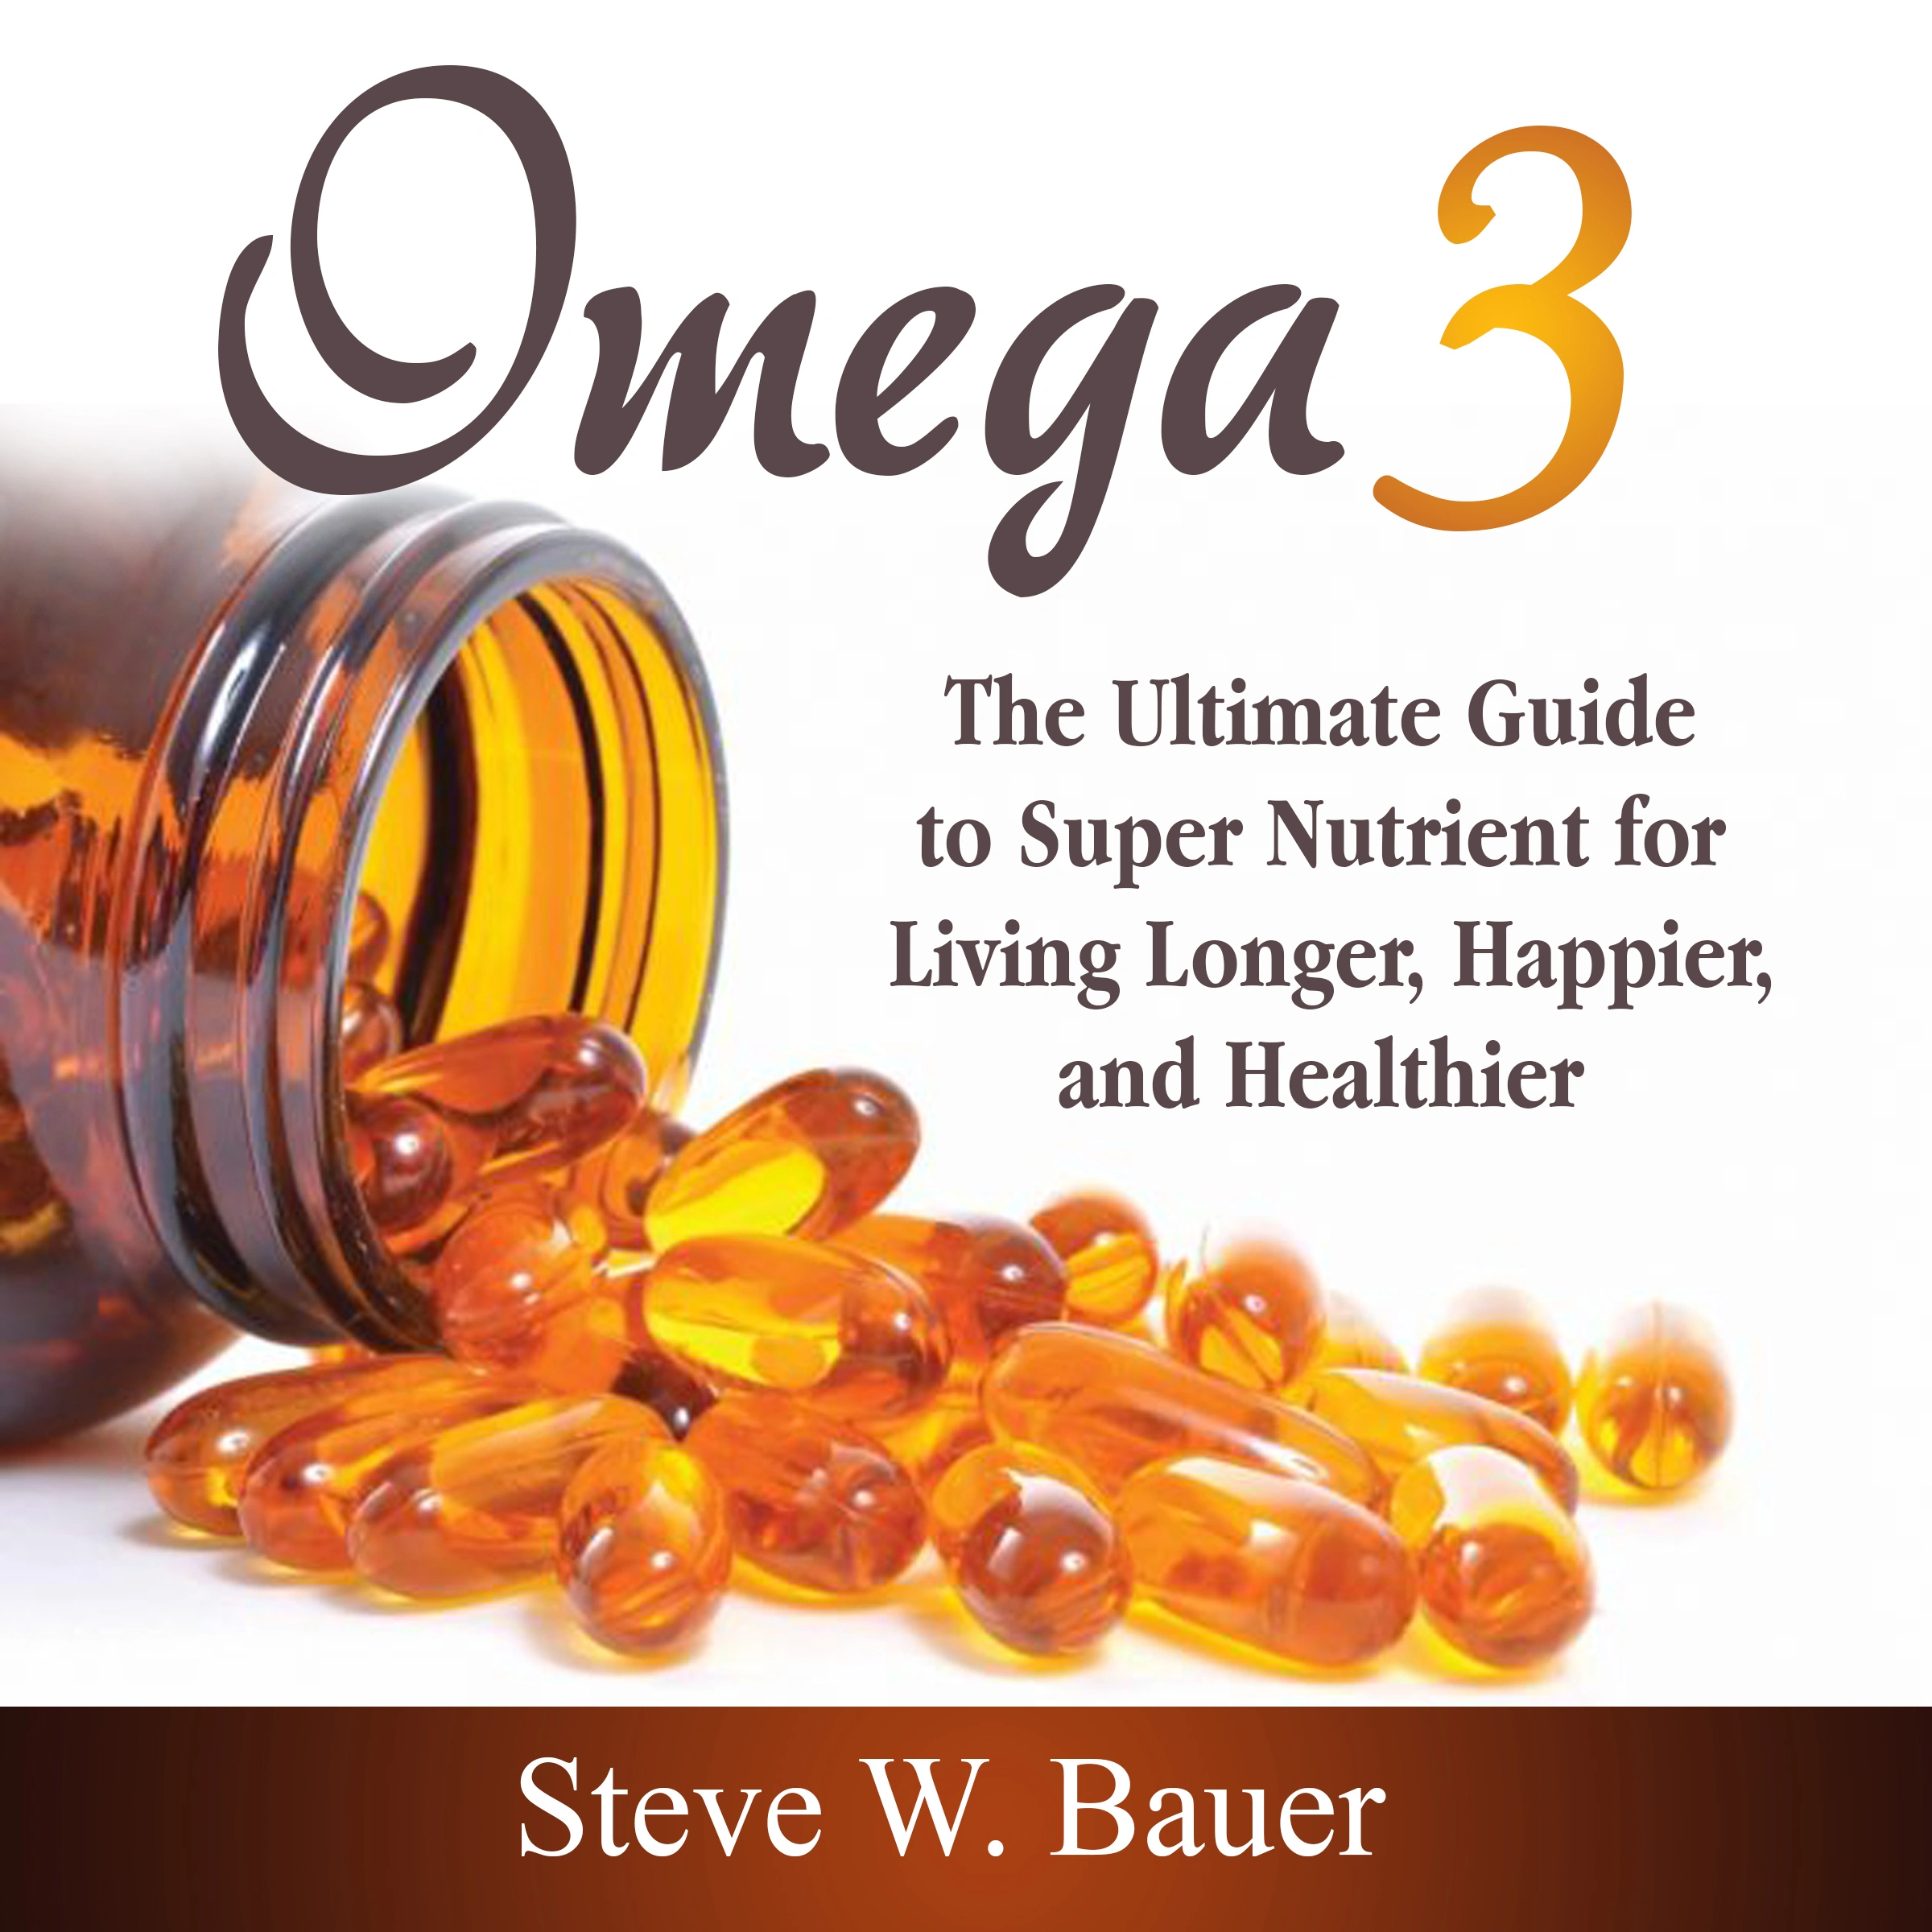 Omega 3: The Ultimate Guide to Super Nutrient for Living Longer, Happier, and Healthier Audiobook by Steve W. Bauer